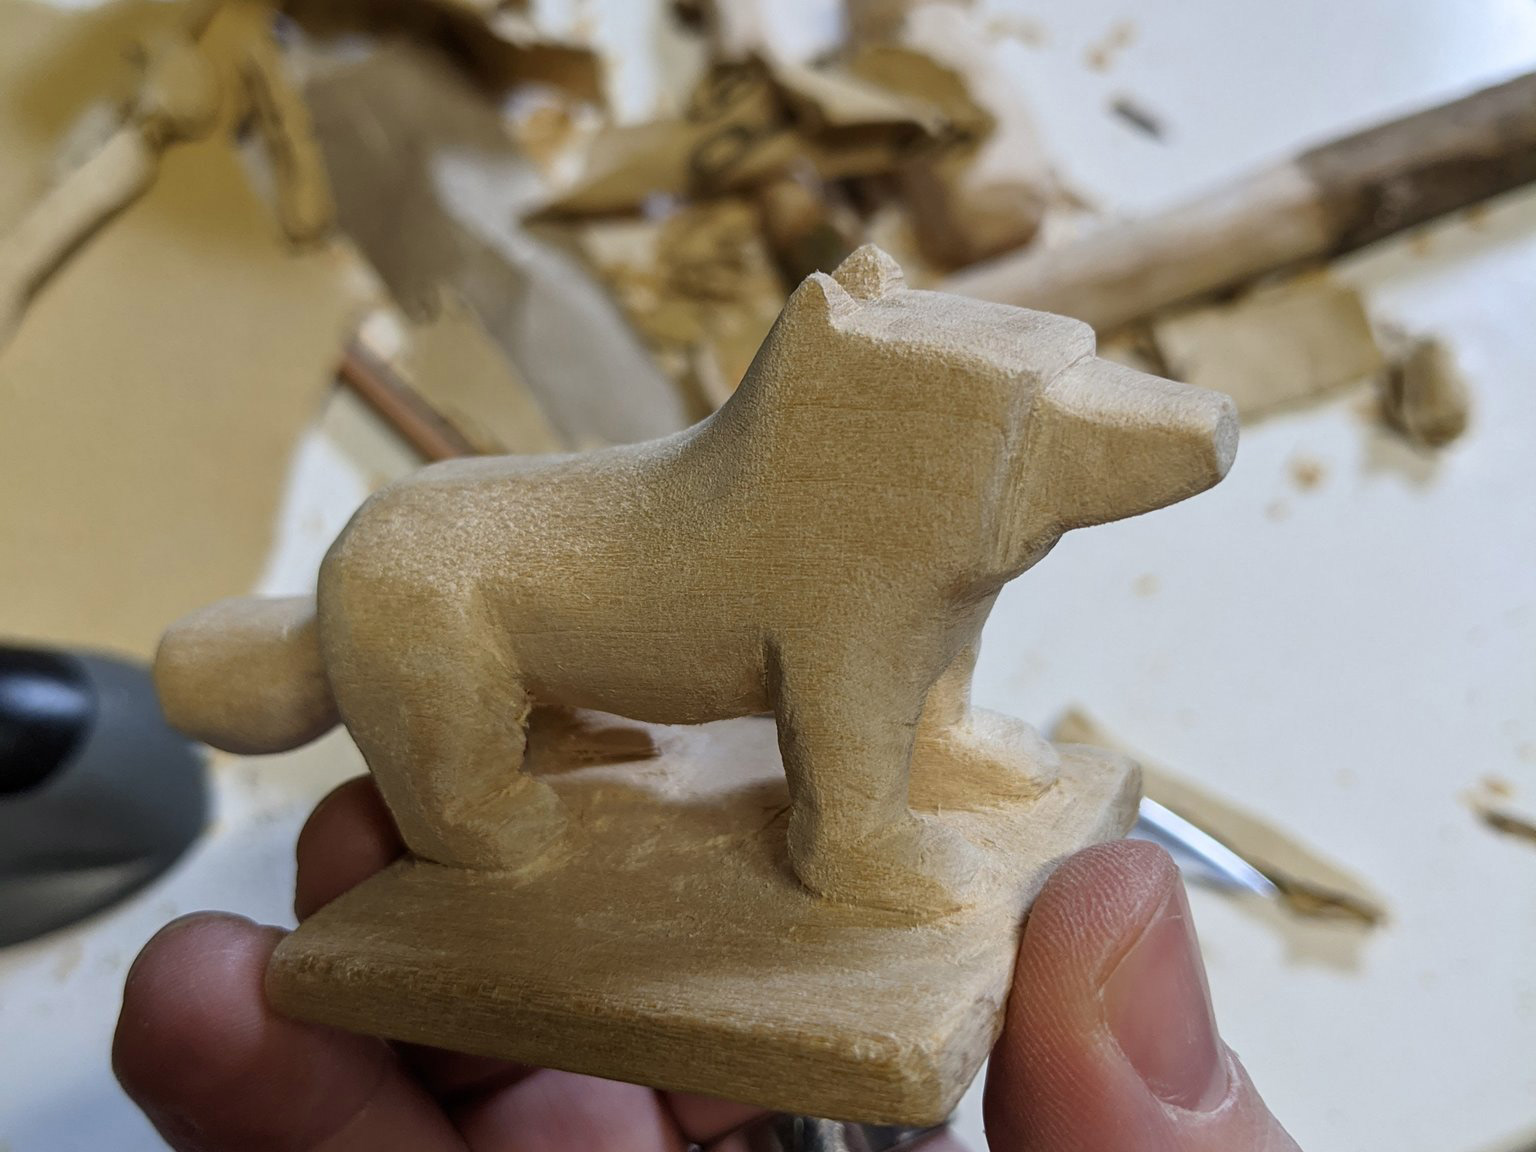 Holding the dog to the side, fully formed and beginning to be smoothed out